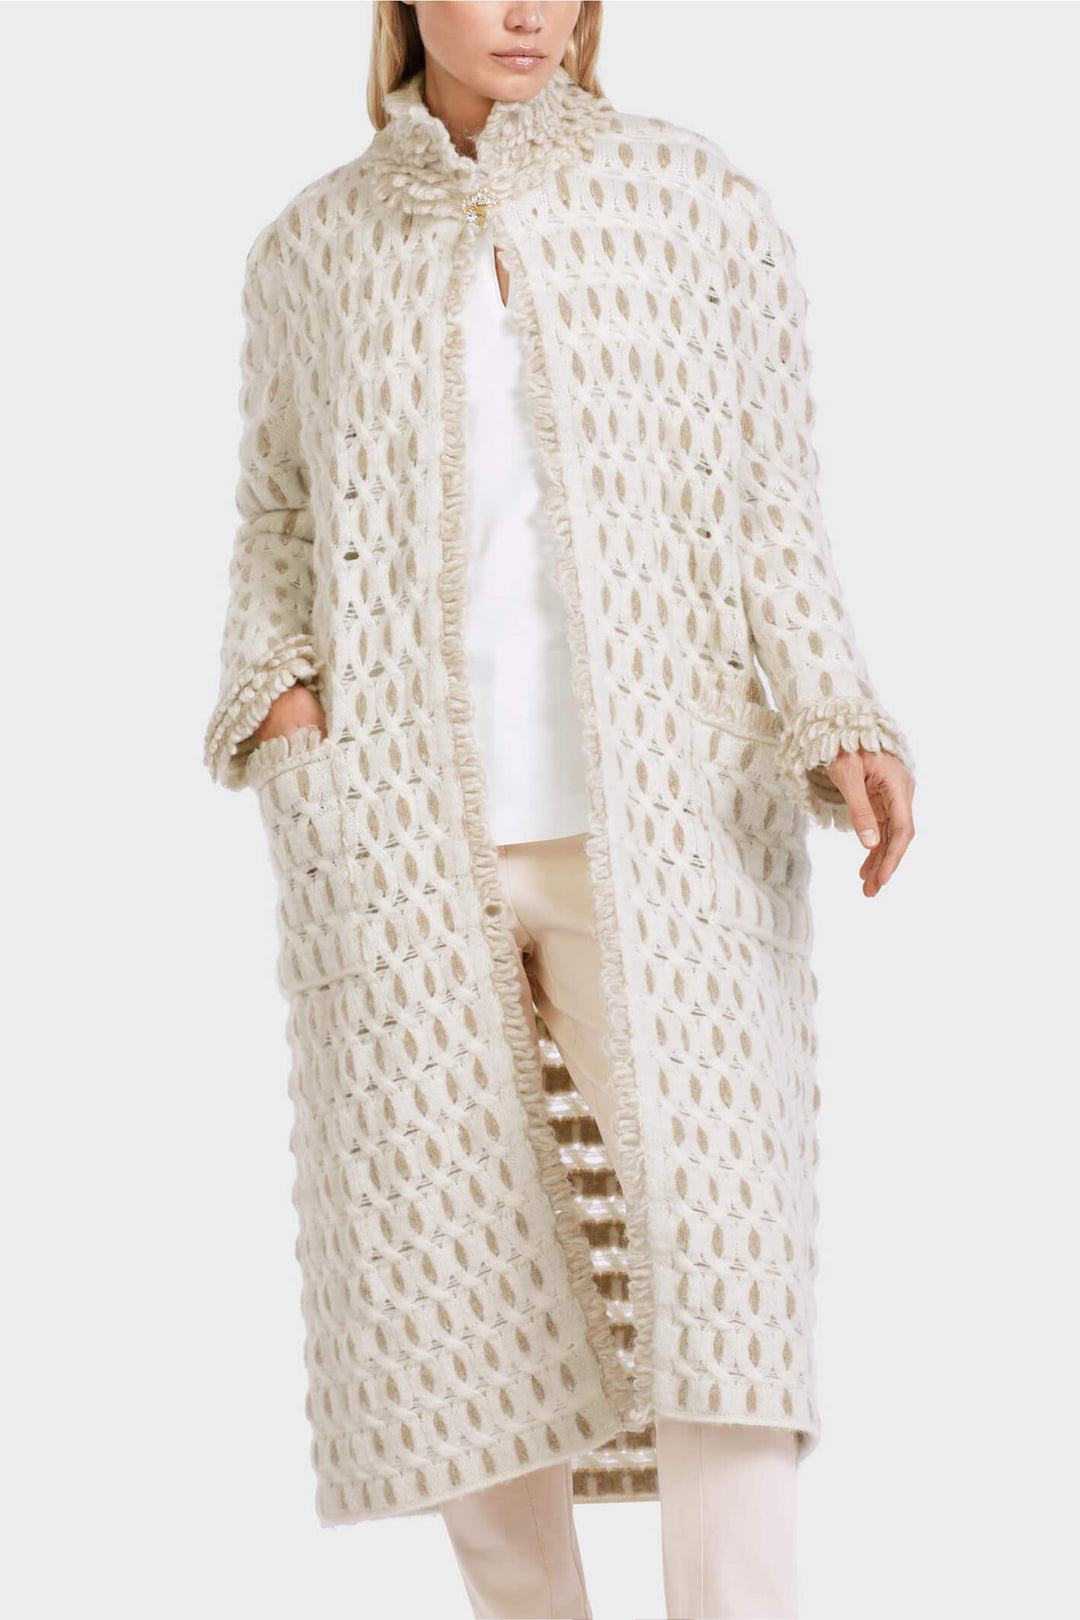 Marc Cain Collections VC 11.19 M46 110 Off White Knitted Coat - Olivia Grace Fashion